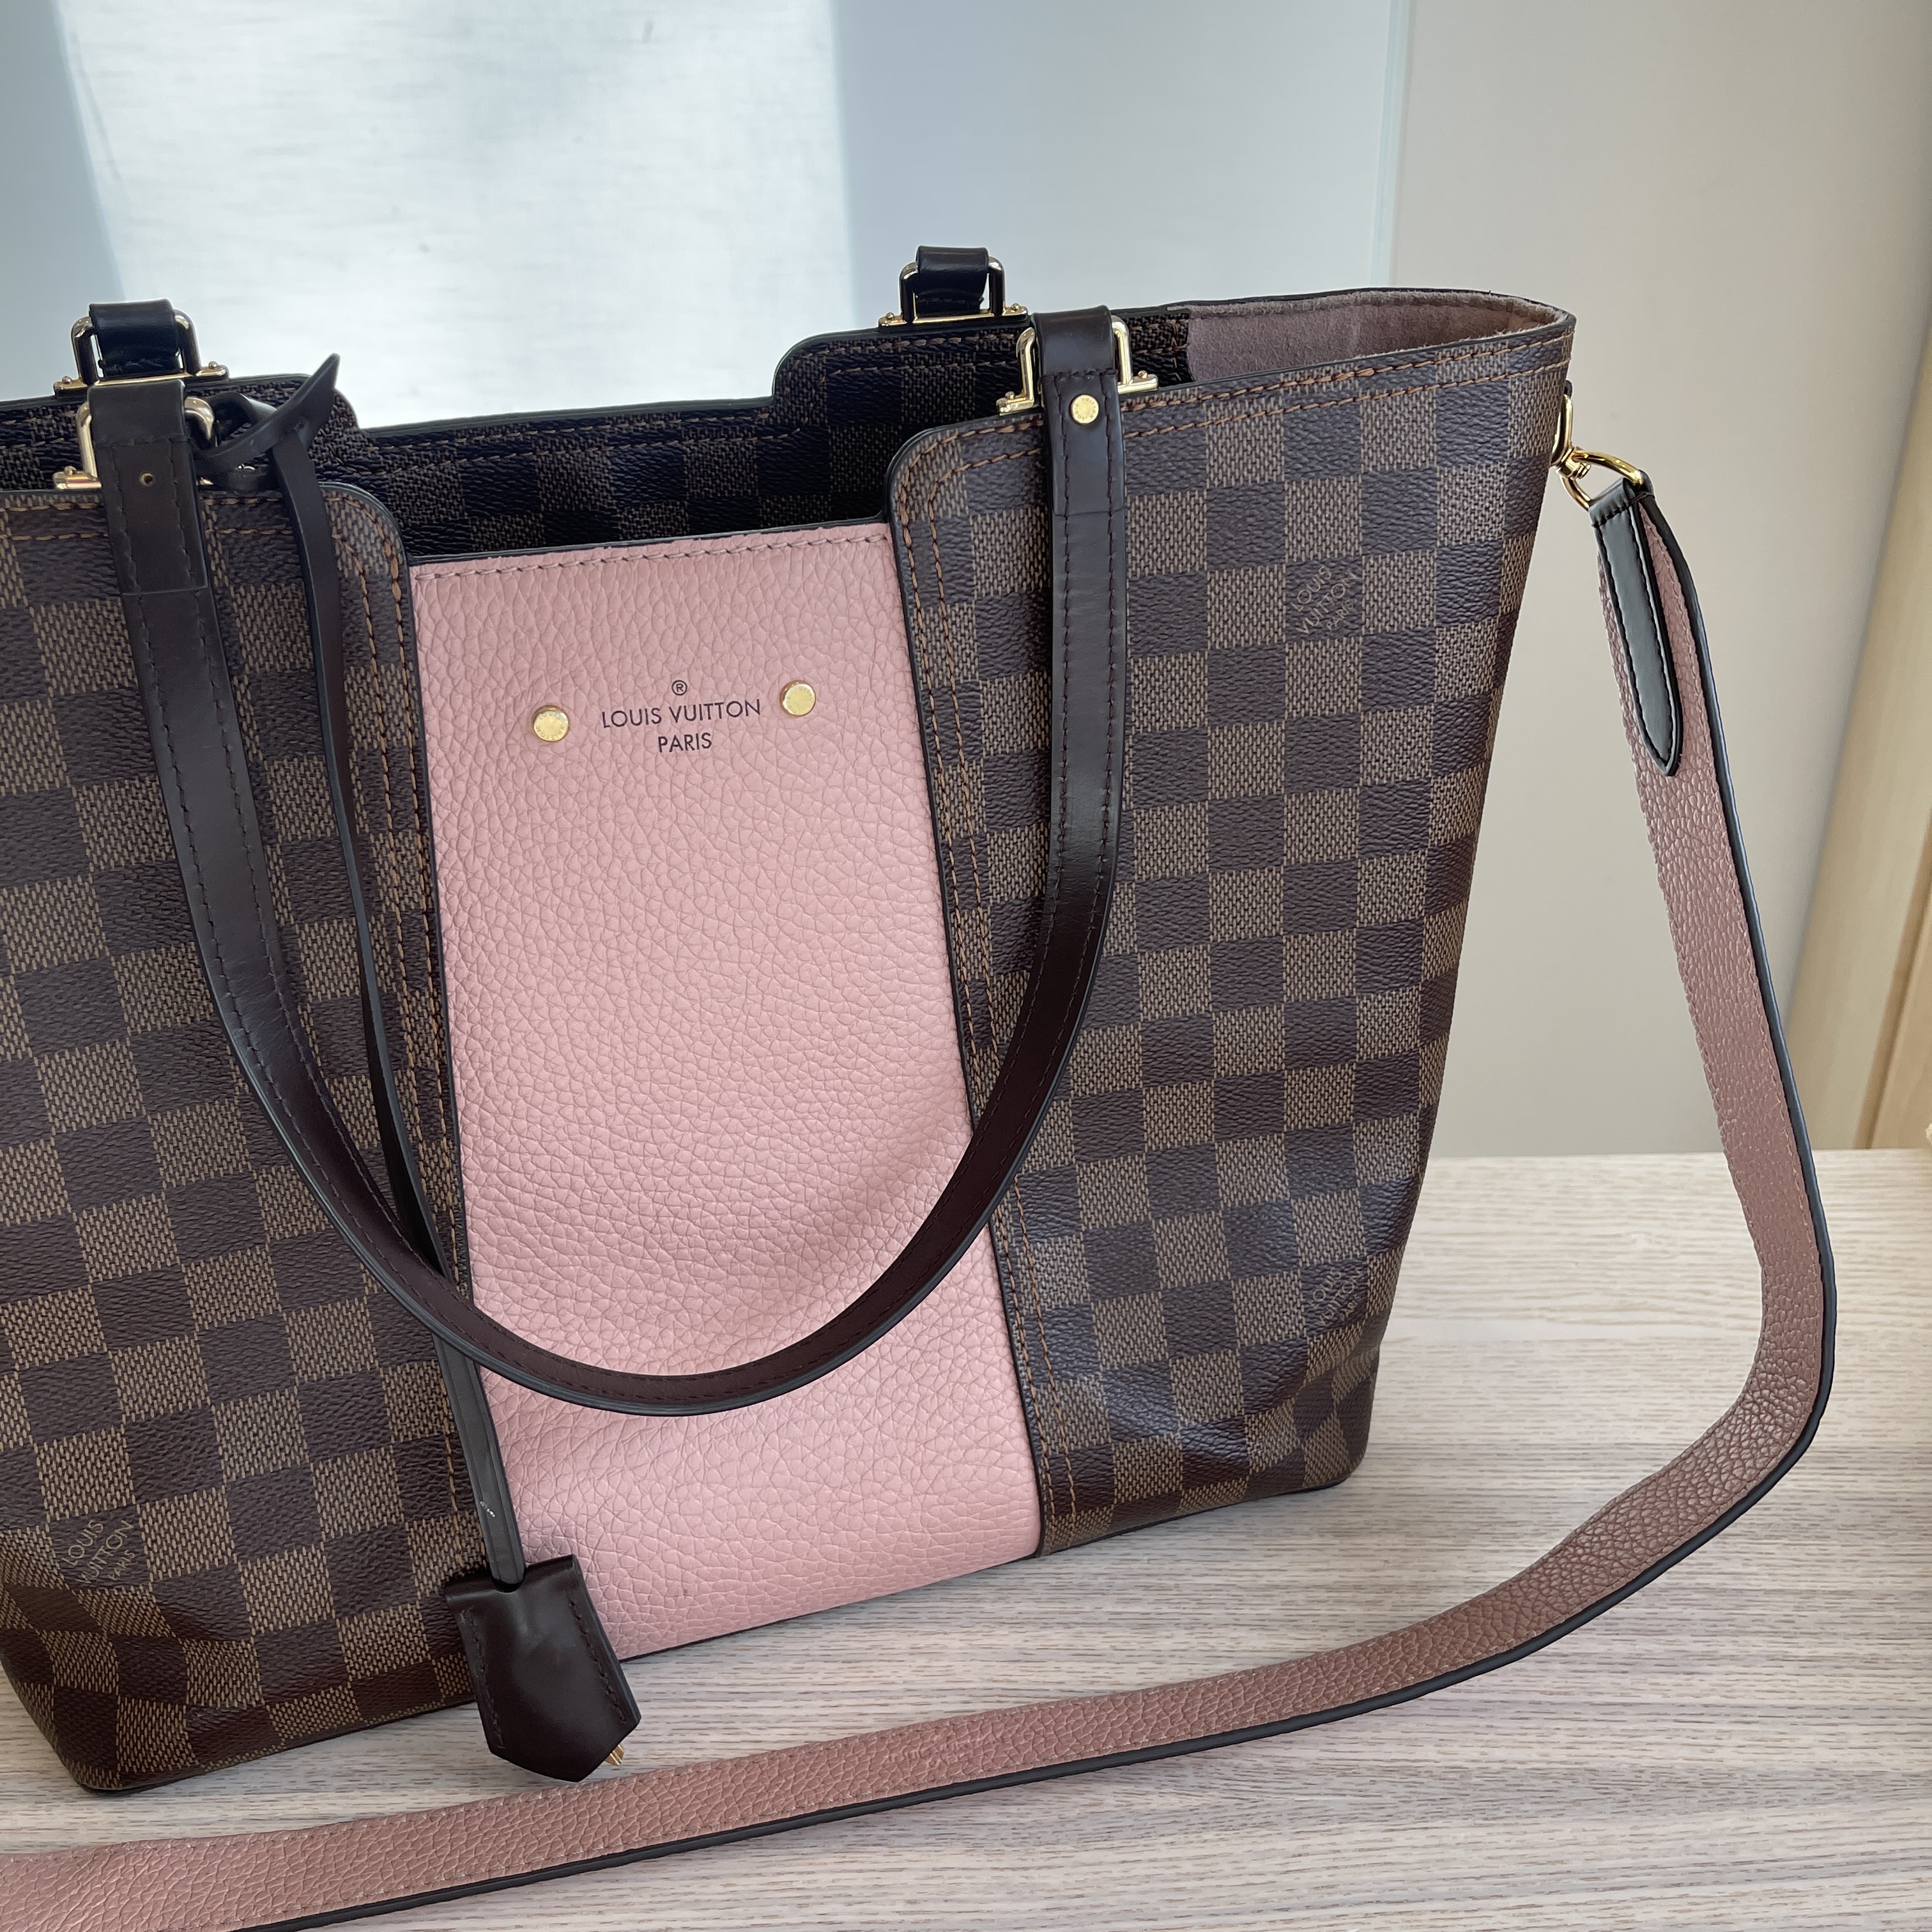 USED Louis Vuitton Damier Ebene with Pink Leather Jersey Tote Bag AUTHENTIC